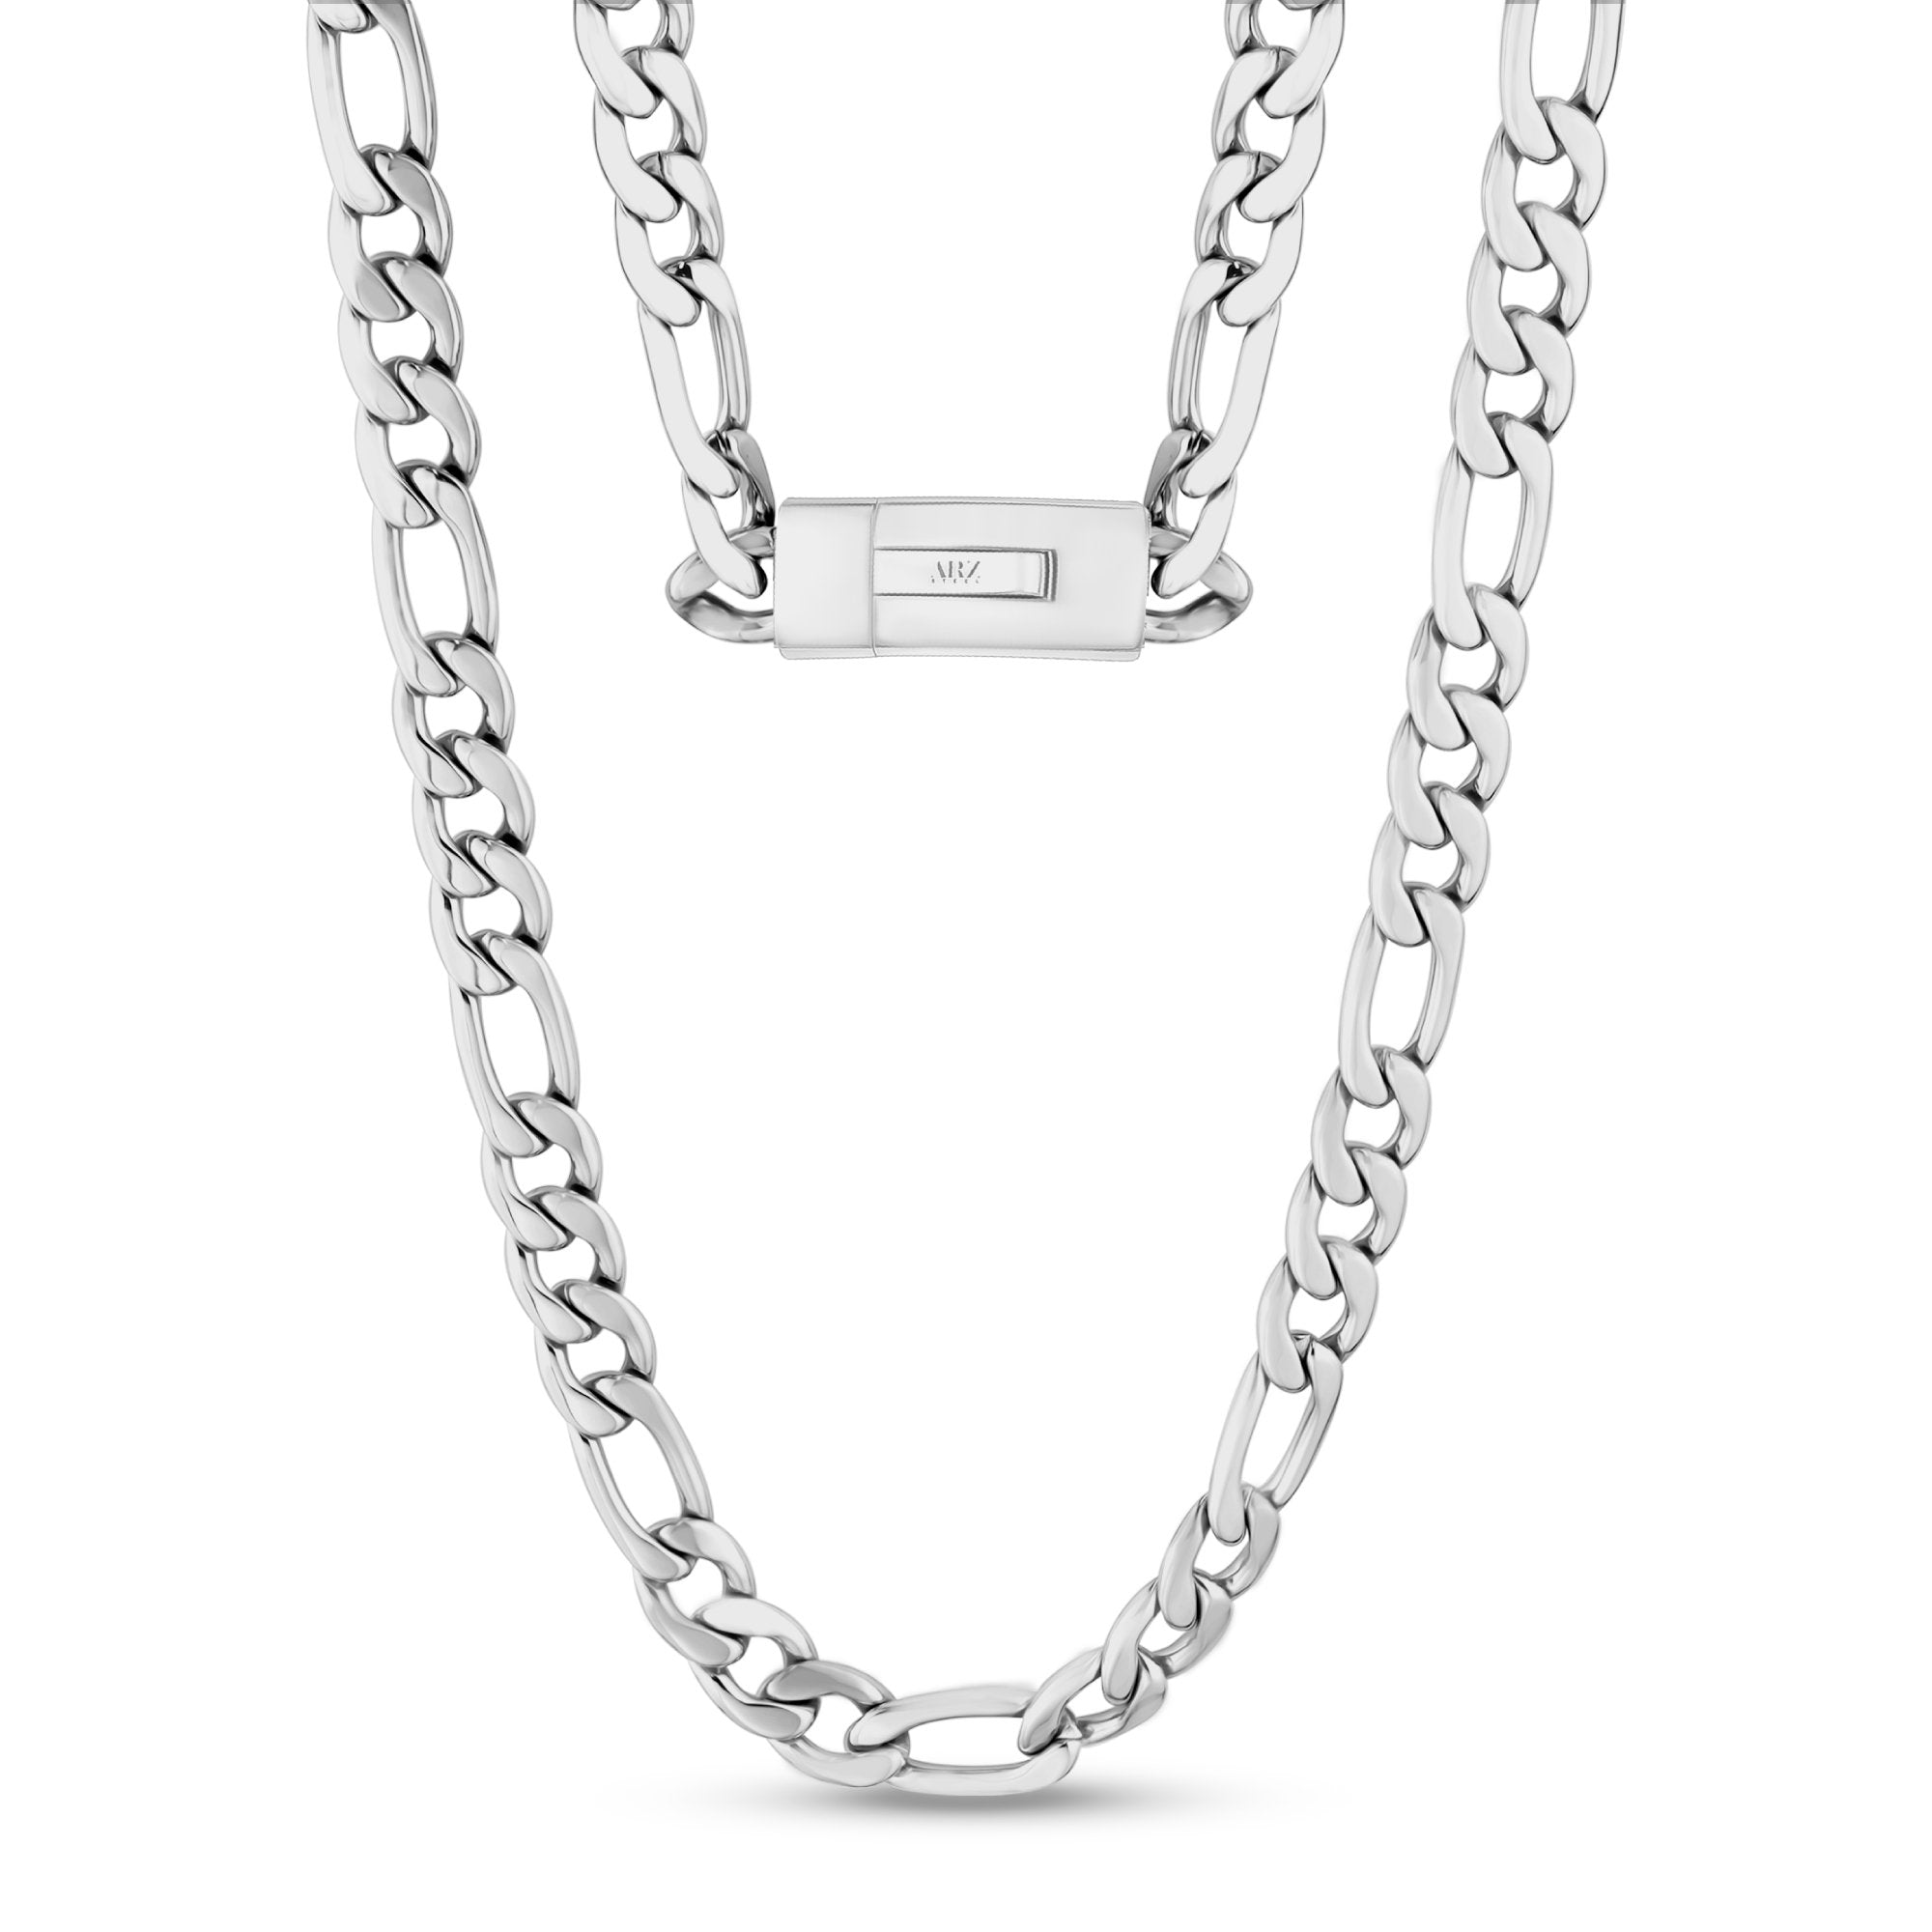 Men's Polished Figaro Chain Stainless Steel Necklace (8mm) - 24